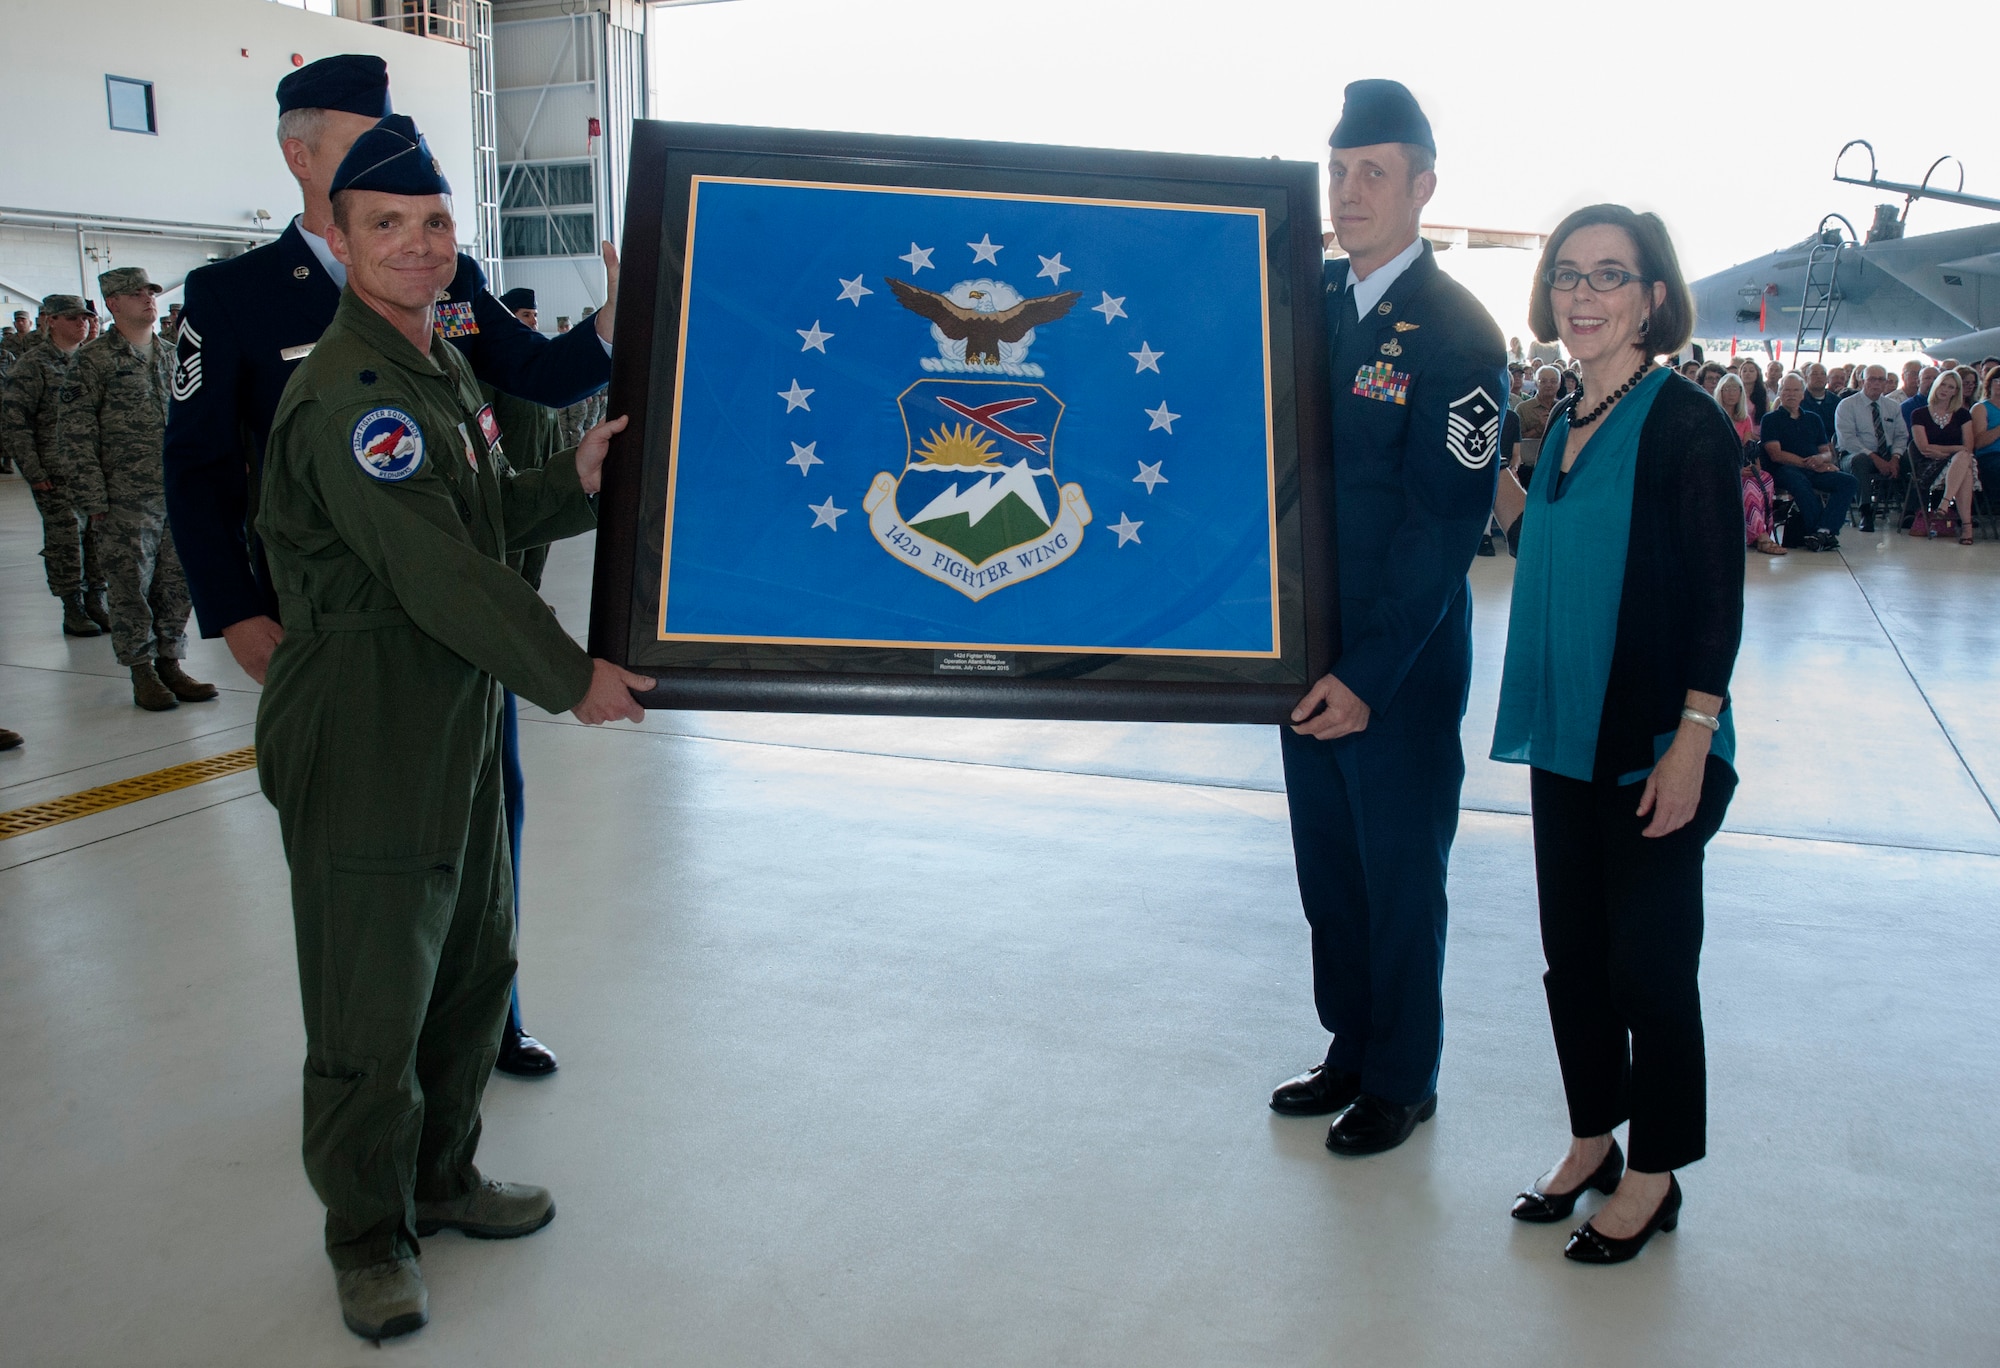 Oregon Air National Guard Lt. Col. Sean Sullivan, 123rd Fighter Squadron commander, 142nd Fighter Wing, left, presents the unit flag of the 142nd Fighter Wing to Oregon Governor Kate Brown during the unit’s mobilization ceremony, June 26, 2015, Portland Air National Guard Base, Ore. (U.S. Air National Guard photo by Tech. Sgt. John Hughel, 142nd Fighter Wing Public Affairs/Released)